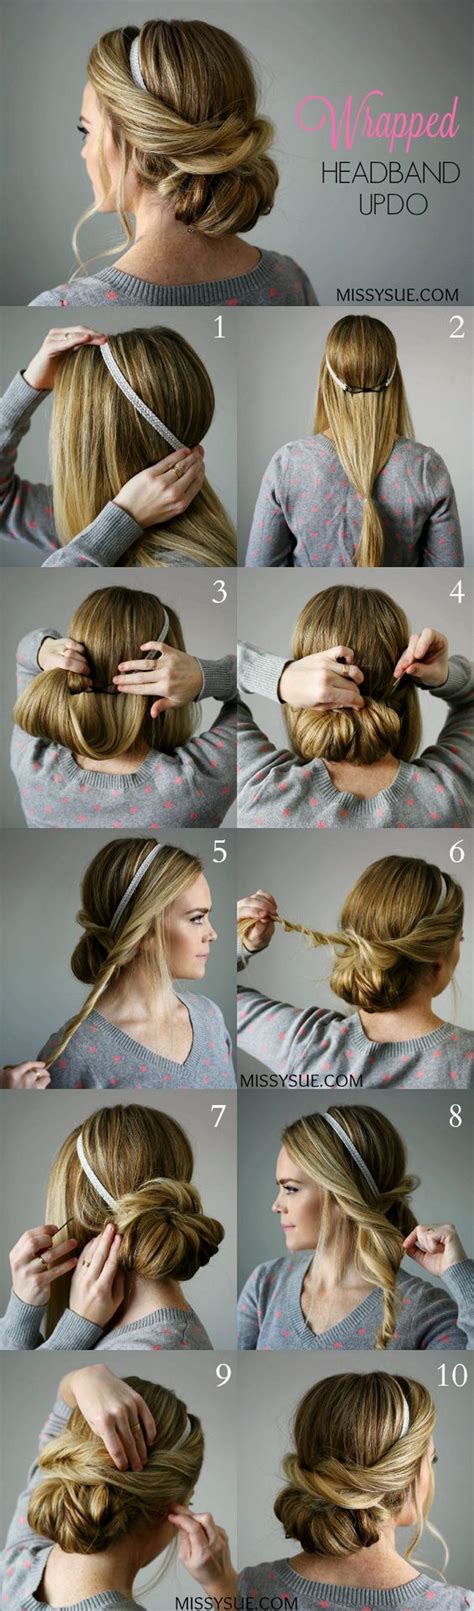 60 Easy Step By Step Hair Tutorials For Long Mediumshort Hair Her Style Code